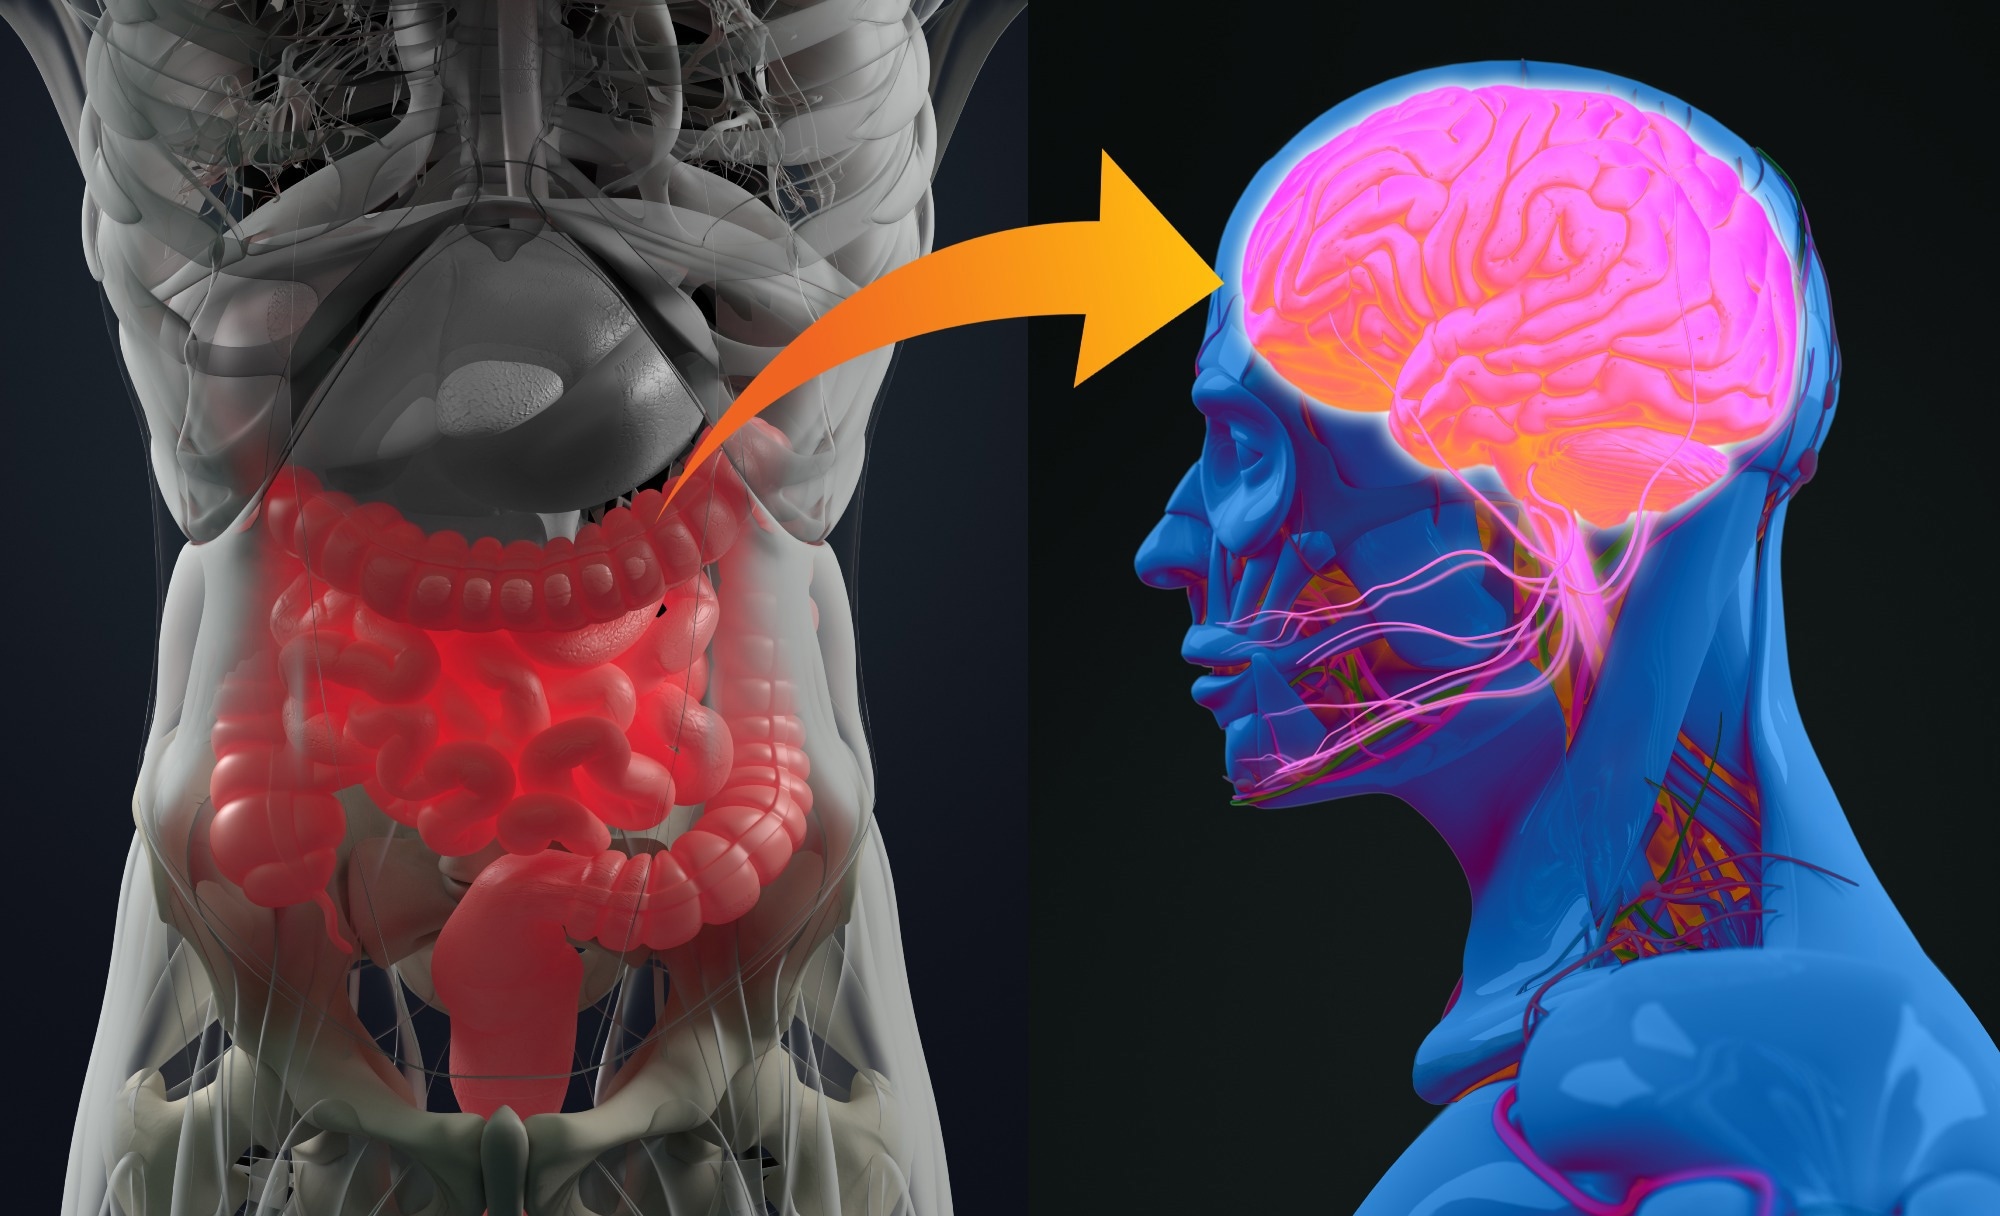 Review: Guts Imbalance Imbalances the Brain: A Review of Gut Microbiota Association With Neurological and Psychiatric Disorders. Image Credit: Anatomy Image / Shutterstock